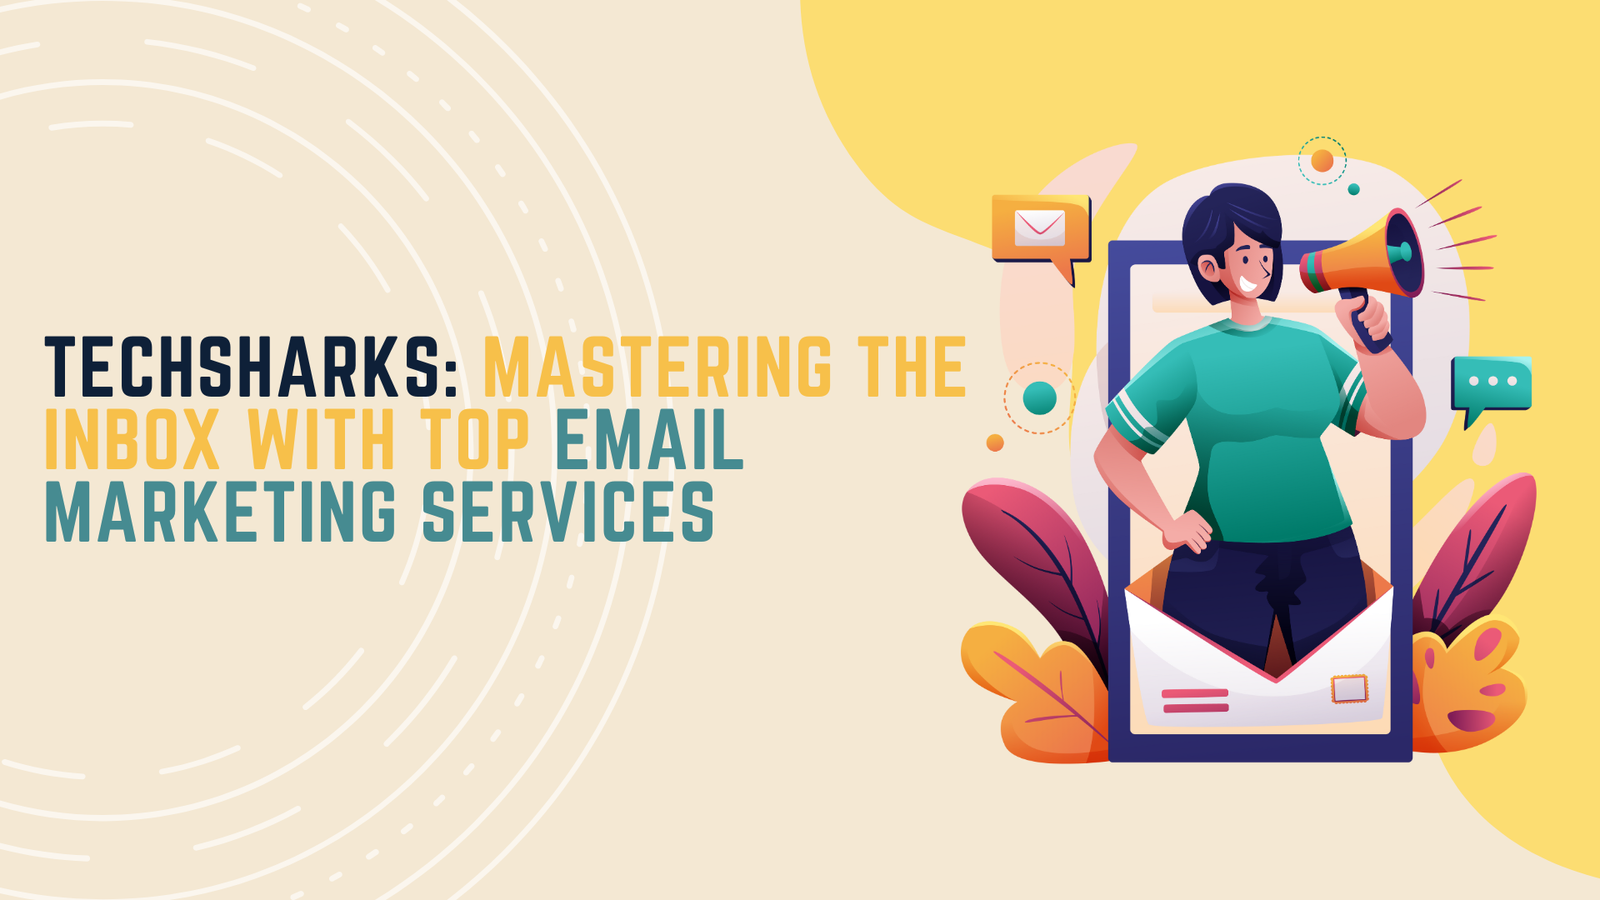 Top email marketing services